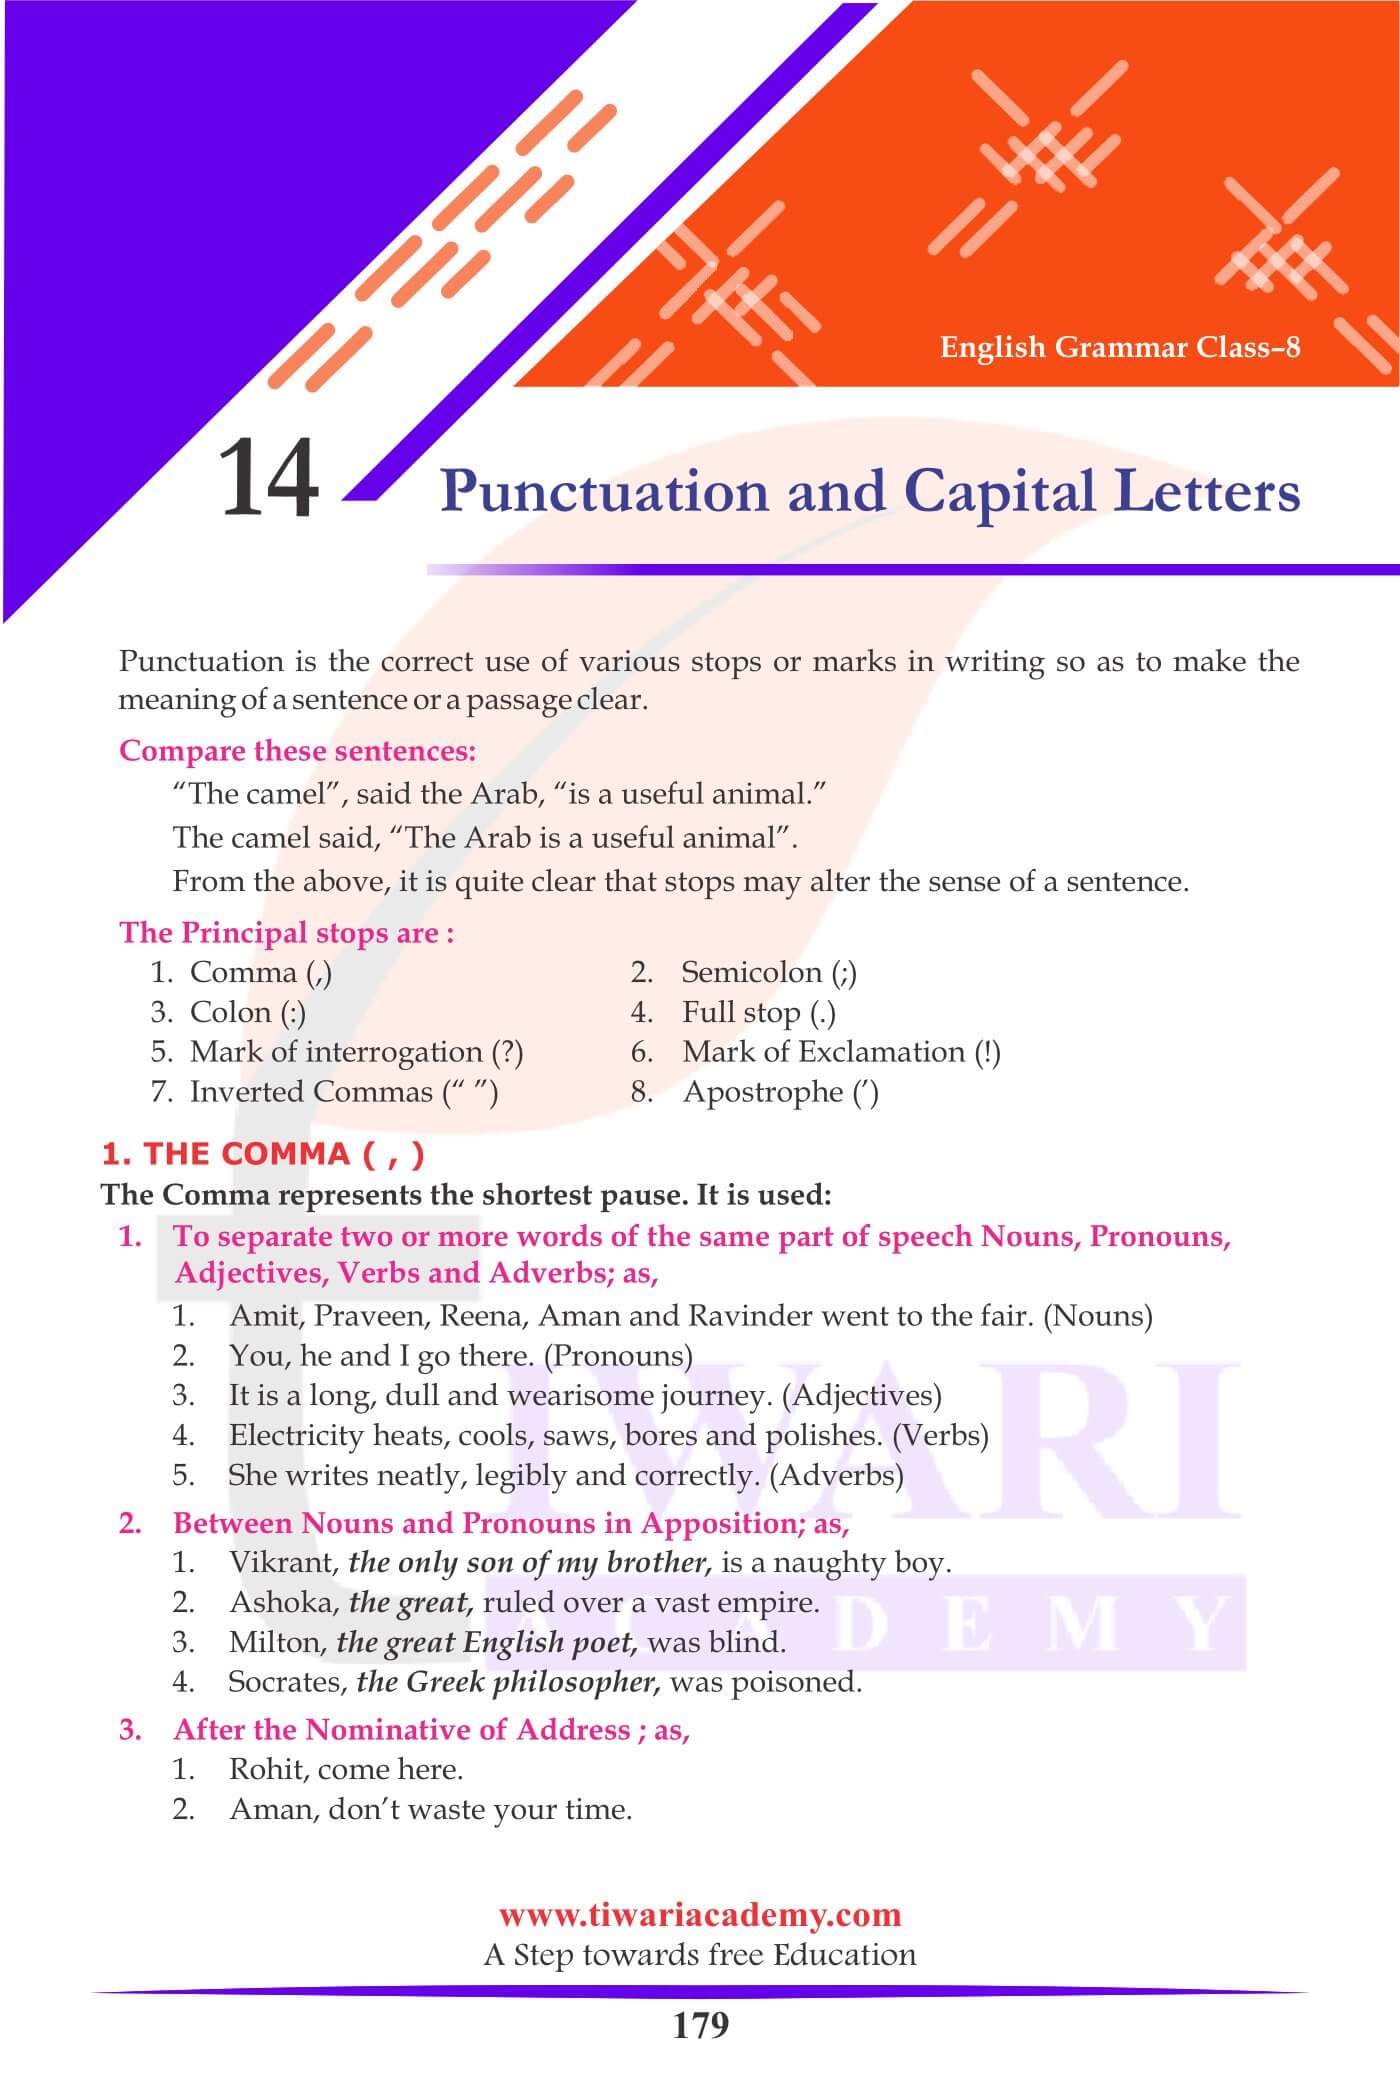 Class 8 English Grammar Chapter 14 Punctuation and Capital Letters